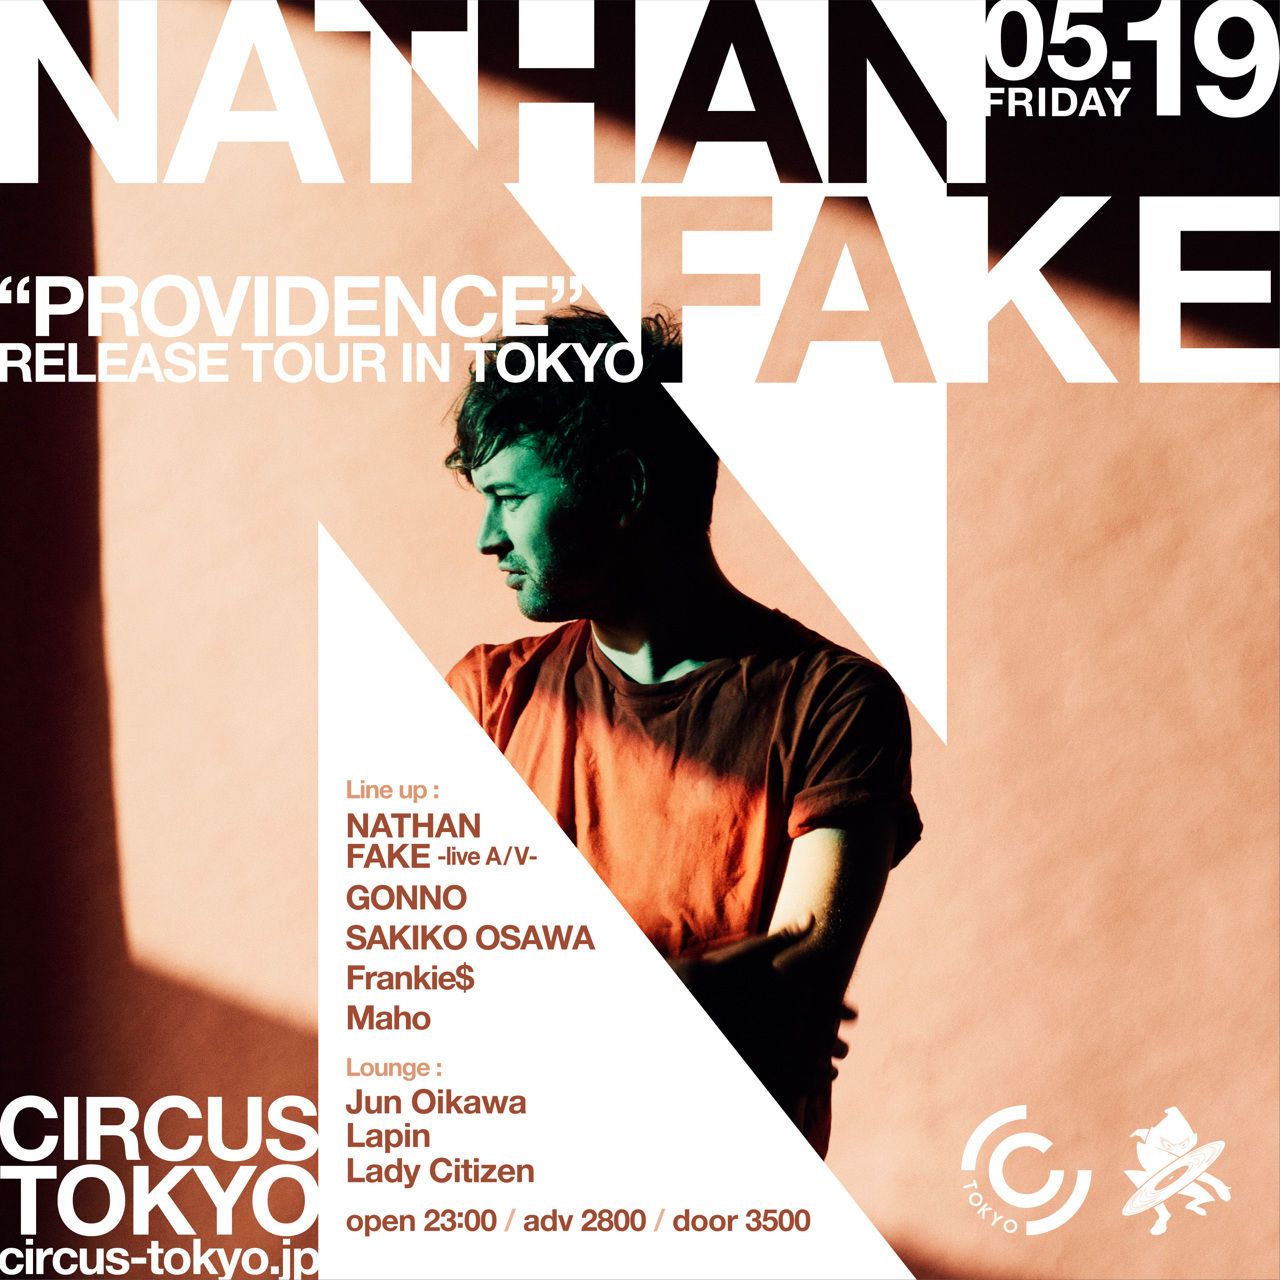 Nathan Fake ”Providence” Release Tour